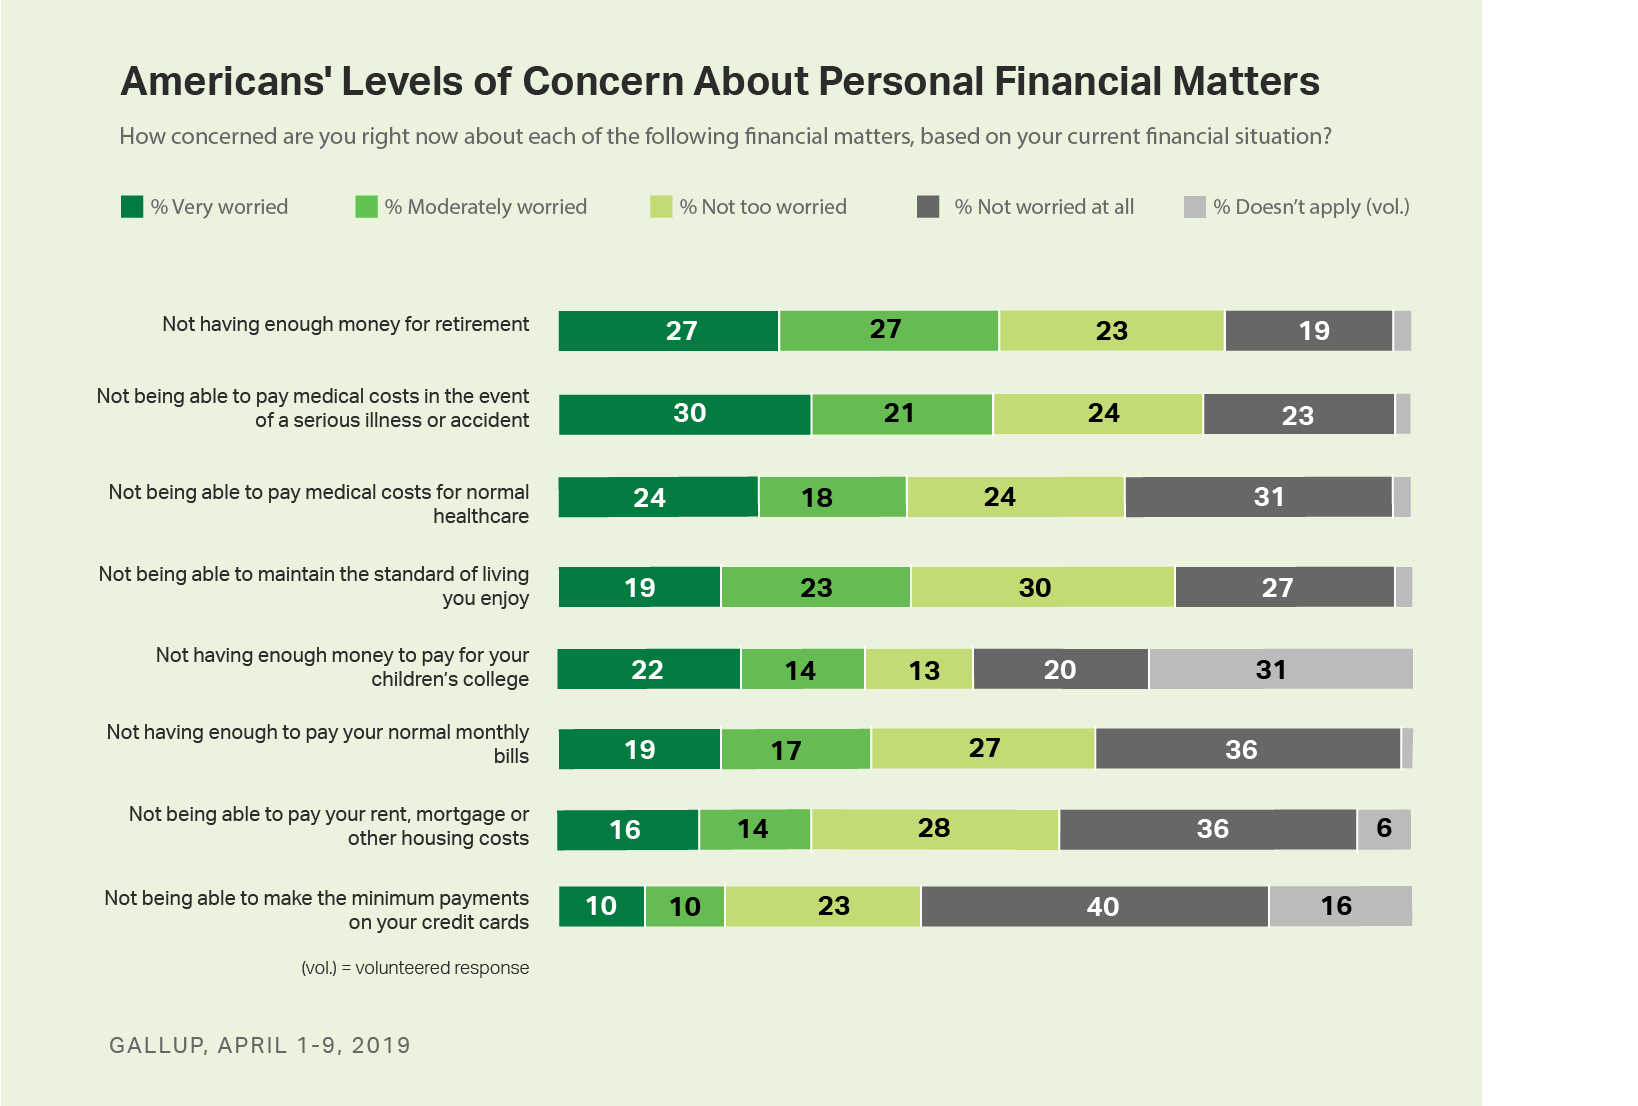 Bar charts. Americans' level of worry about 8 financial matters; retirement and emergency medical costs rank at the top.